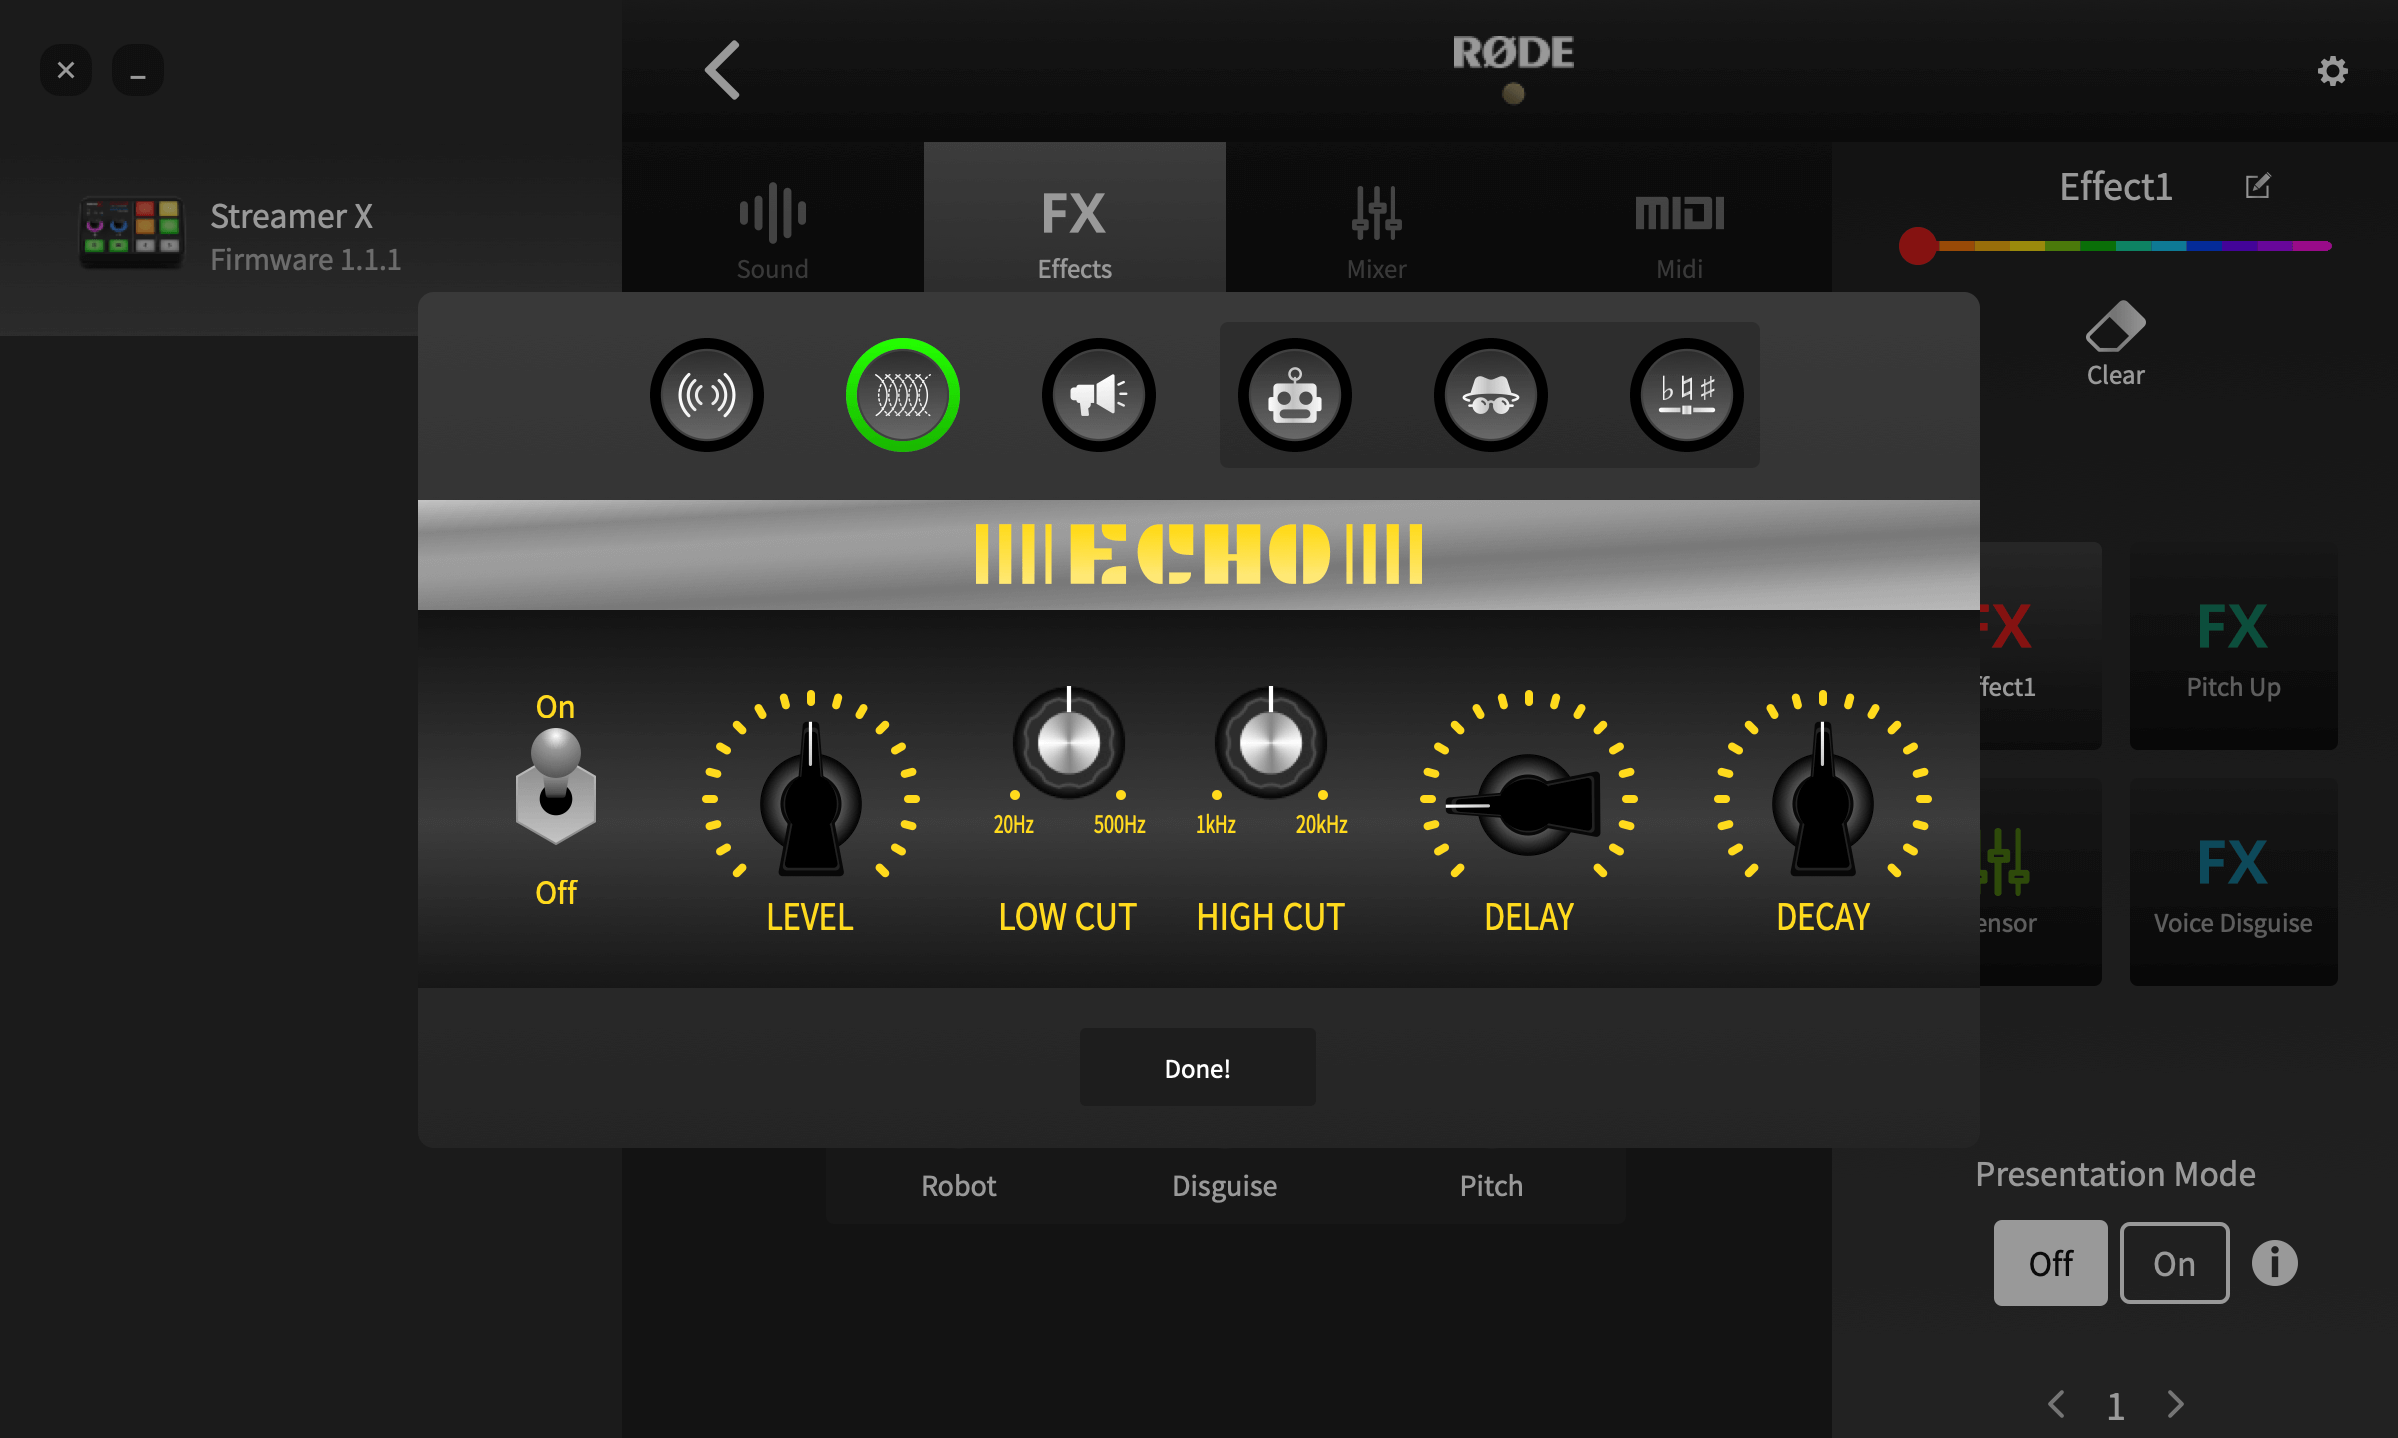 RØDE Central showing Streamer X echo settings